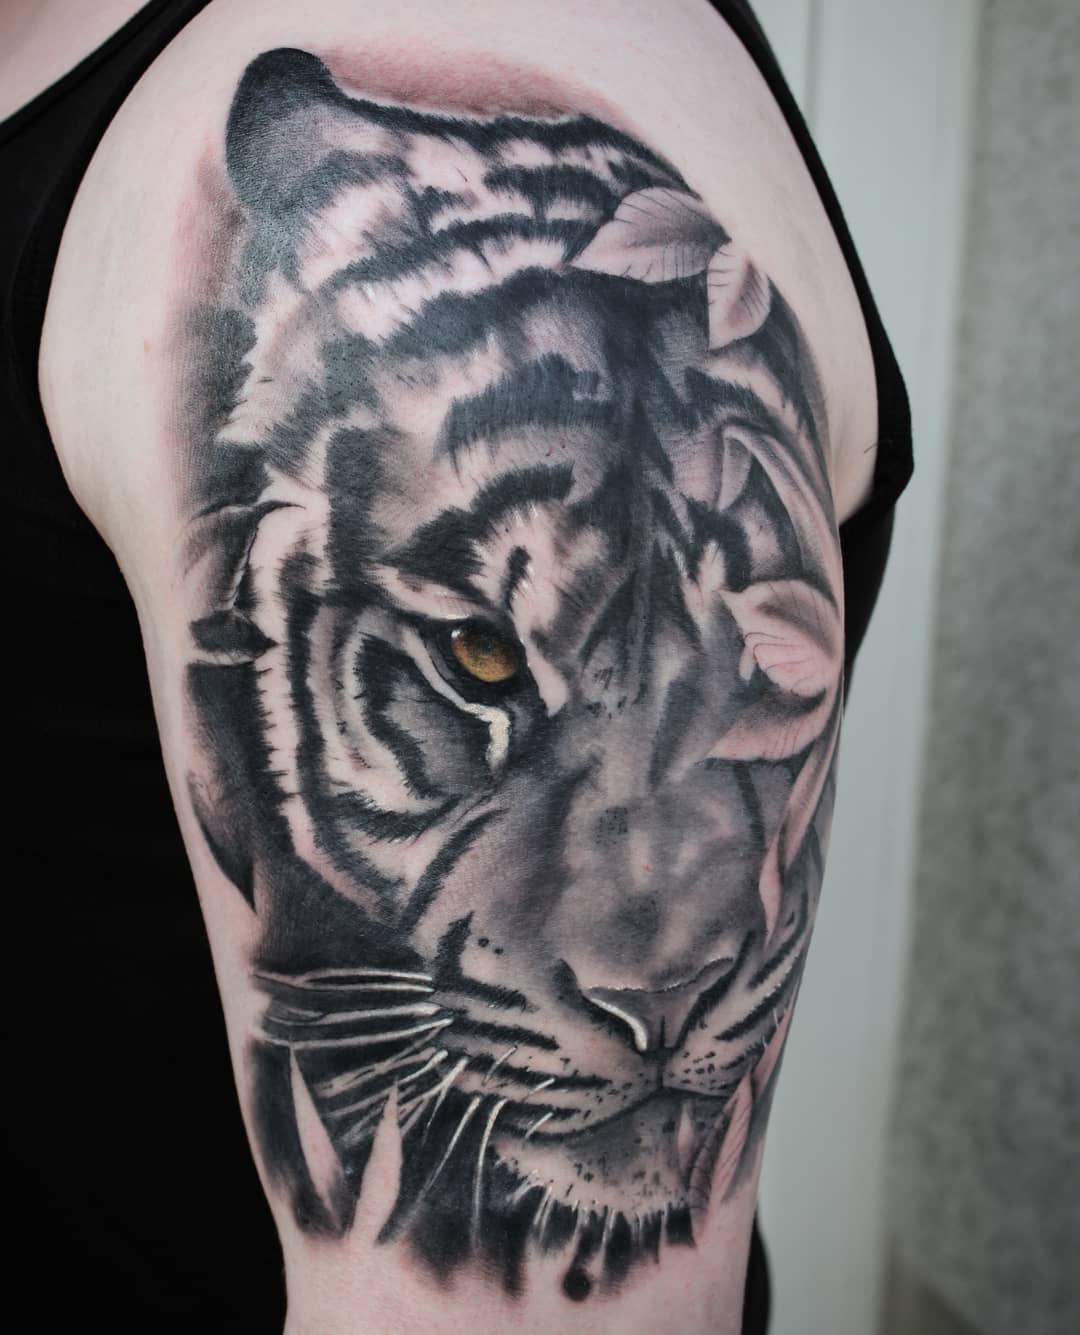 The eye of the tiger lower part healed, upper part fresh.
Thanx again  @simonhei